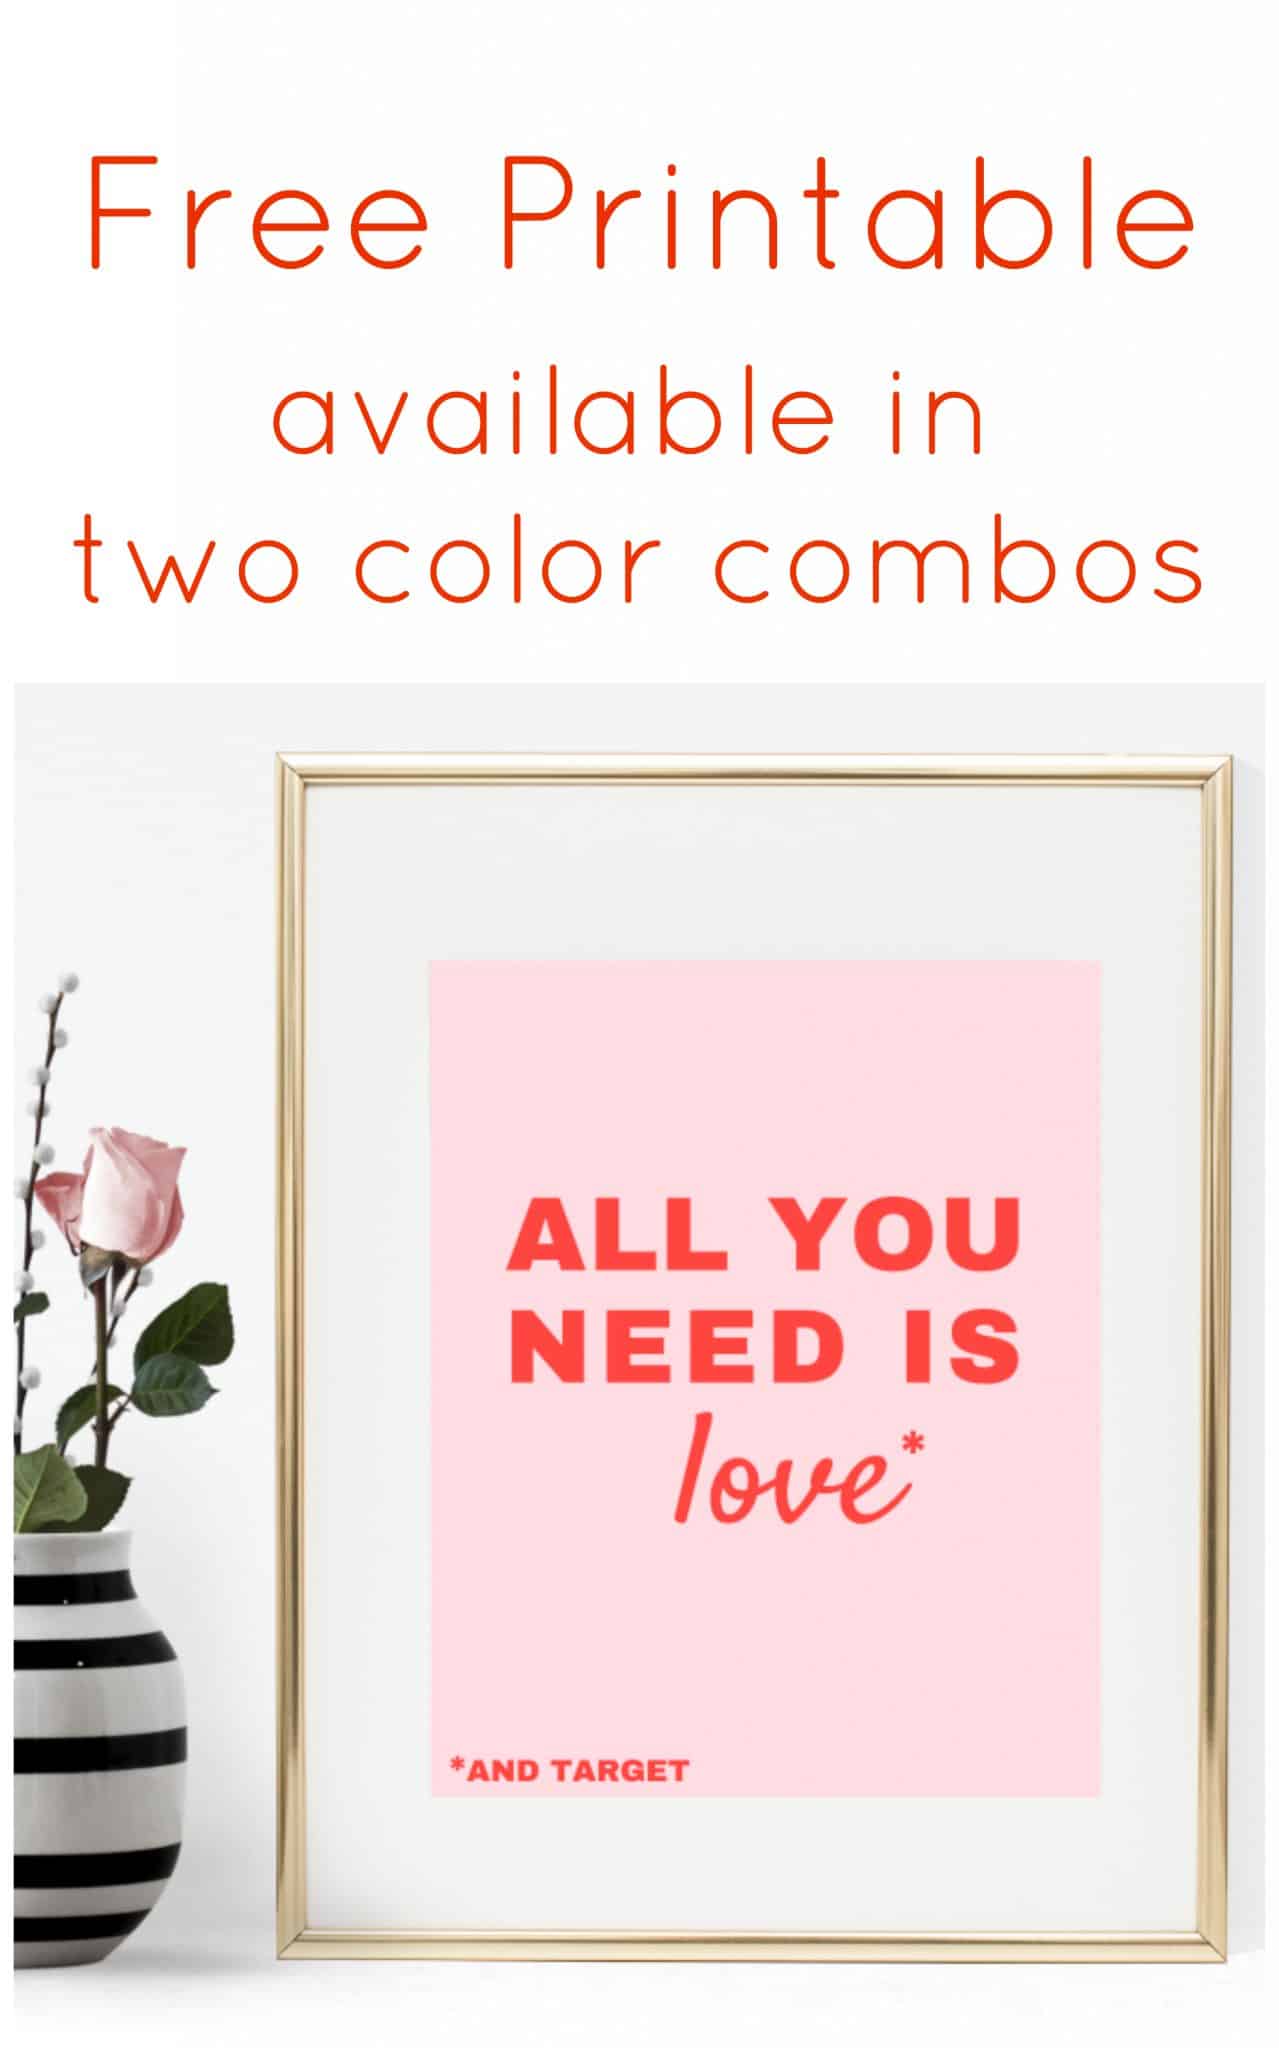 Download this free "All You Need is Love" printable for Valentine's Day or as a gift for your girlfriends. It comes in two color combos!